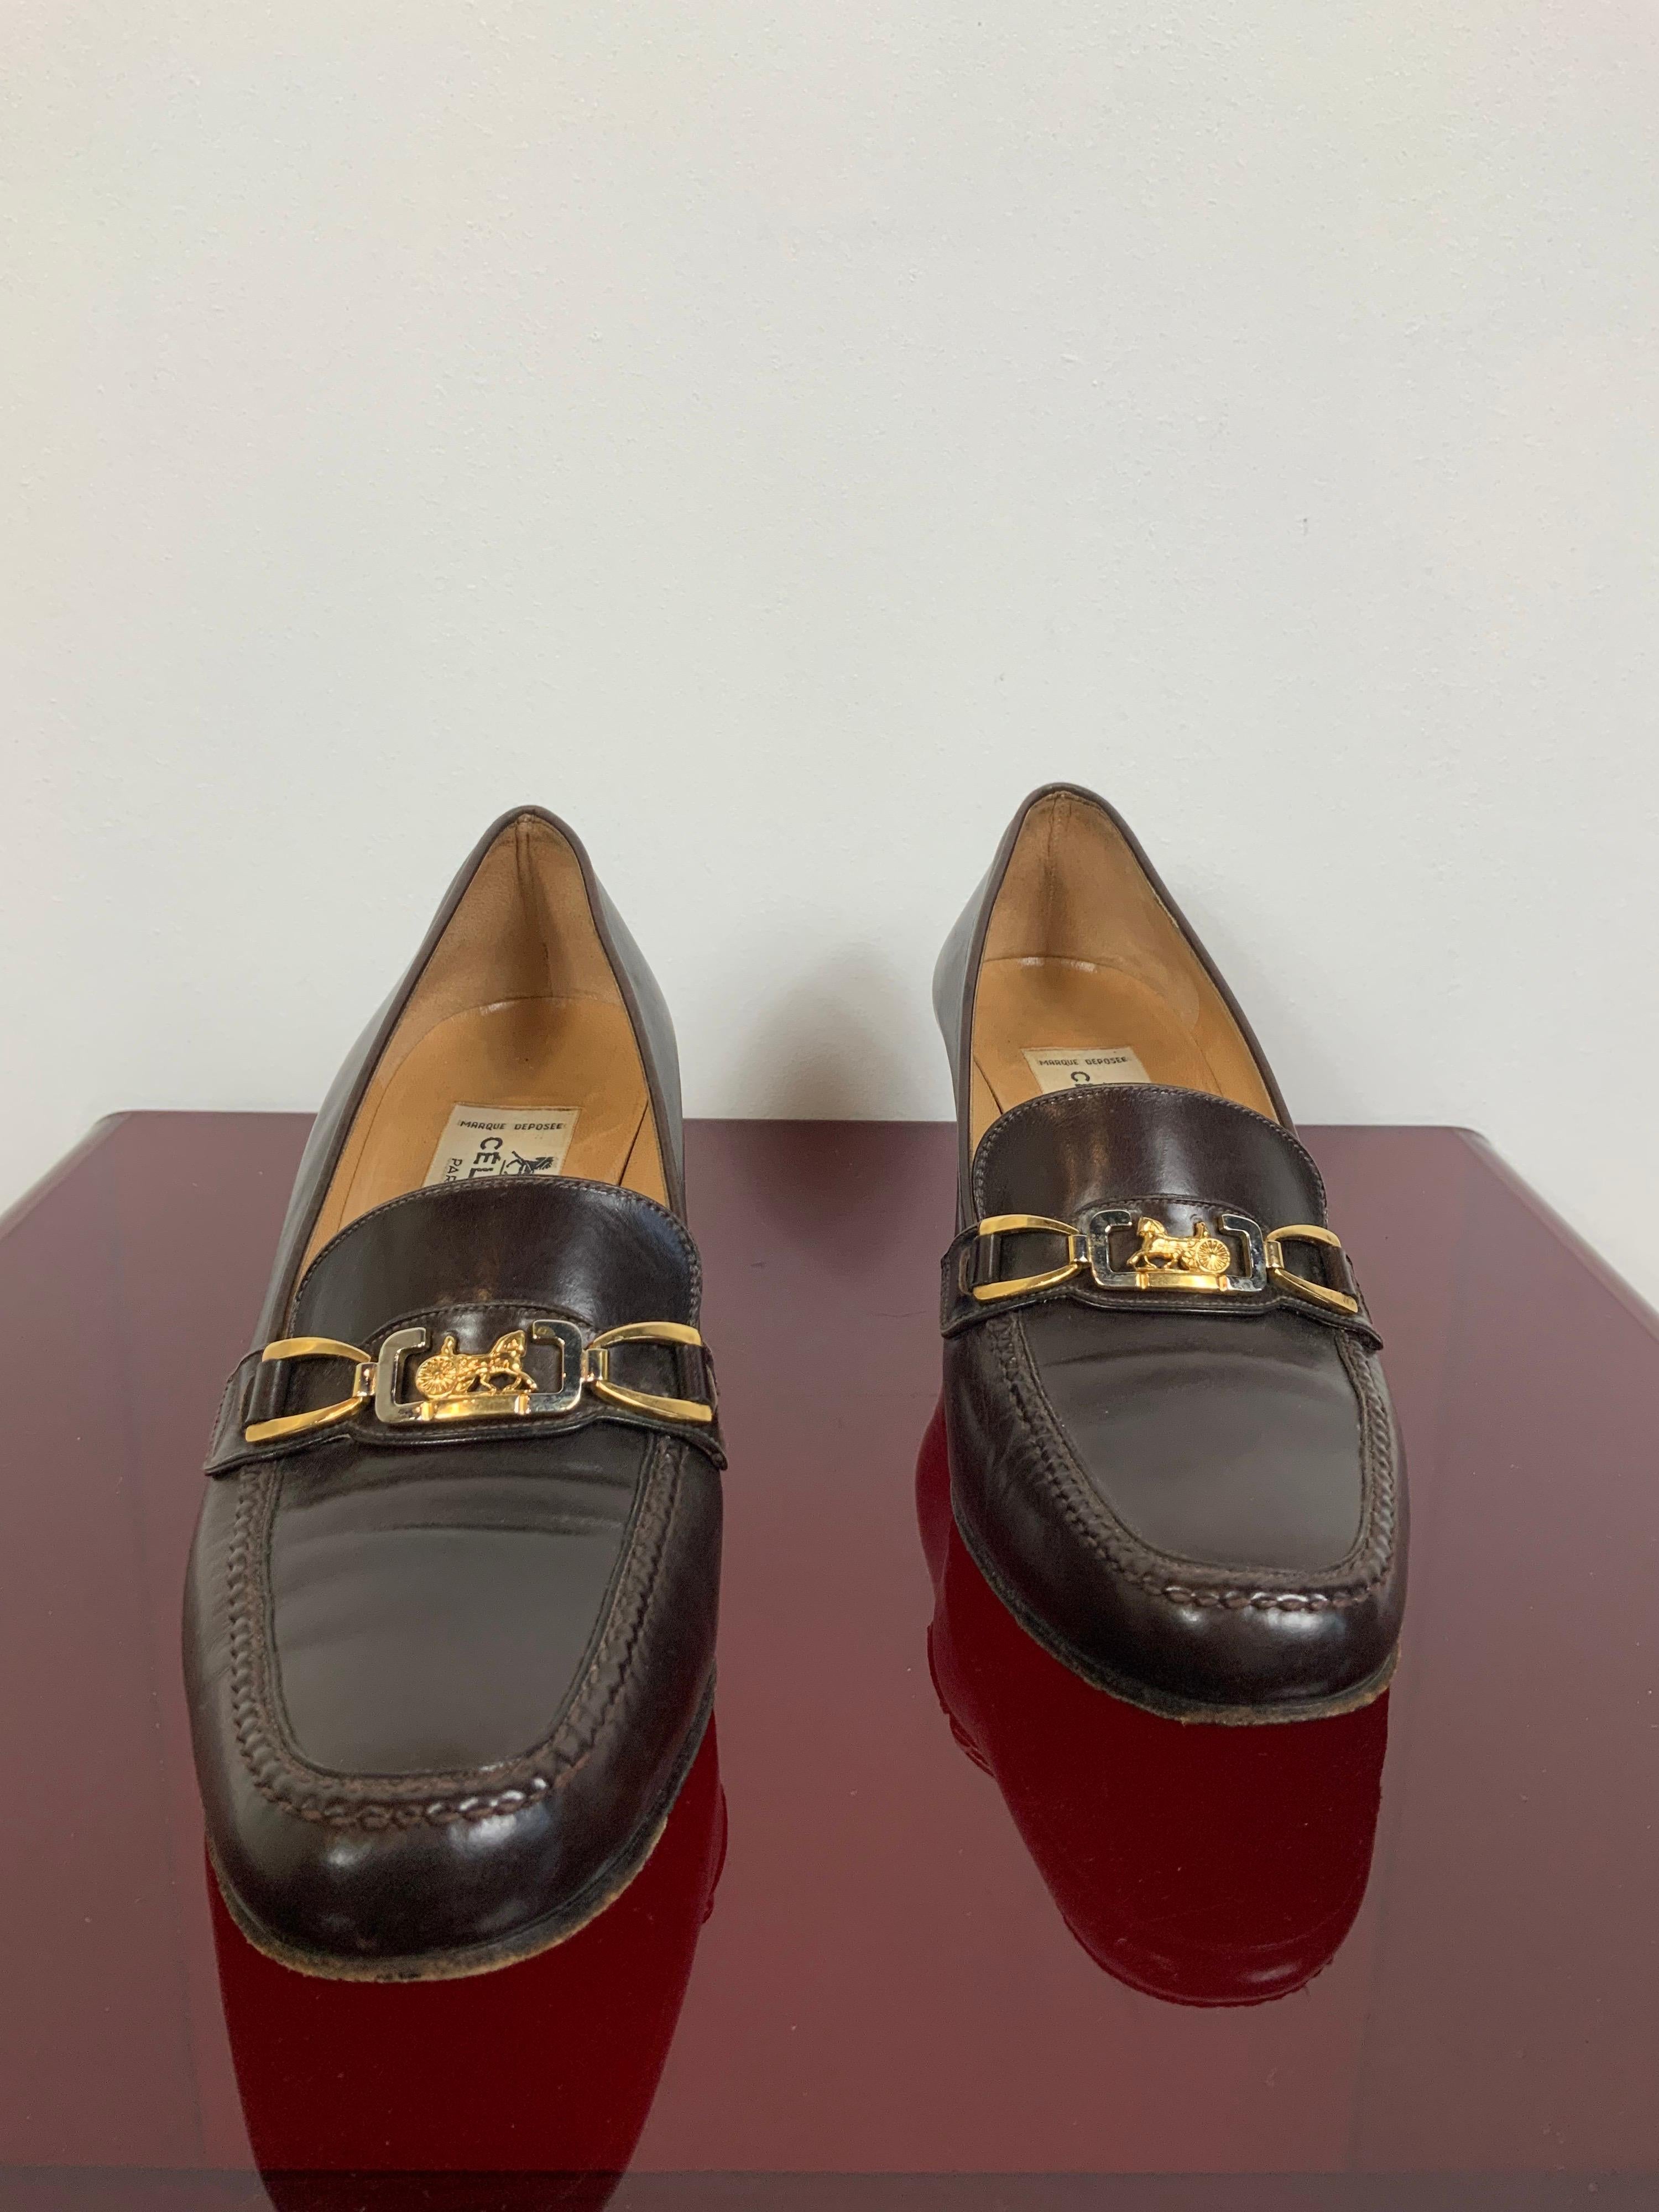 Celine vintage Moccasins.
Brown leather, interior nude leather & gold and silver hardware.
Size 37 Italian.
Heels: 6 cm
Interior sole: 24 cm
Conditions: Good - Previously owned and gently worn, with little signs of use. May show slight pilling,